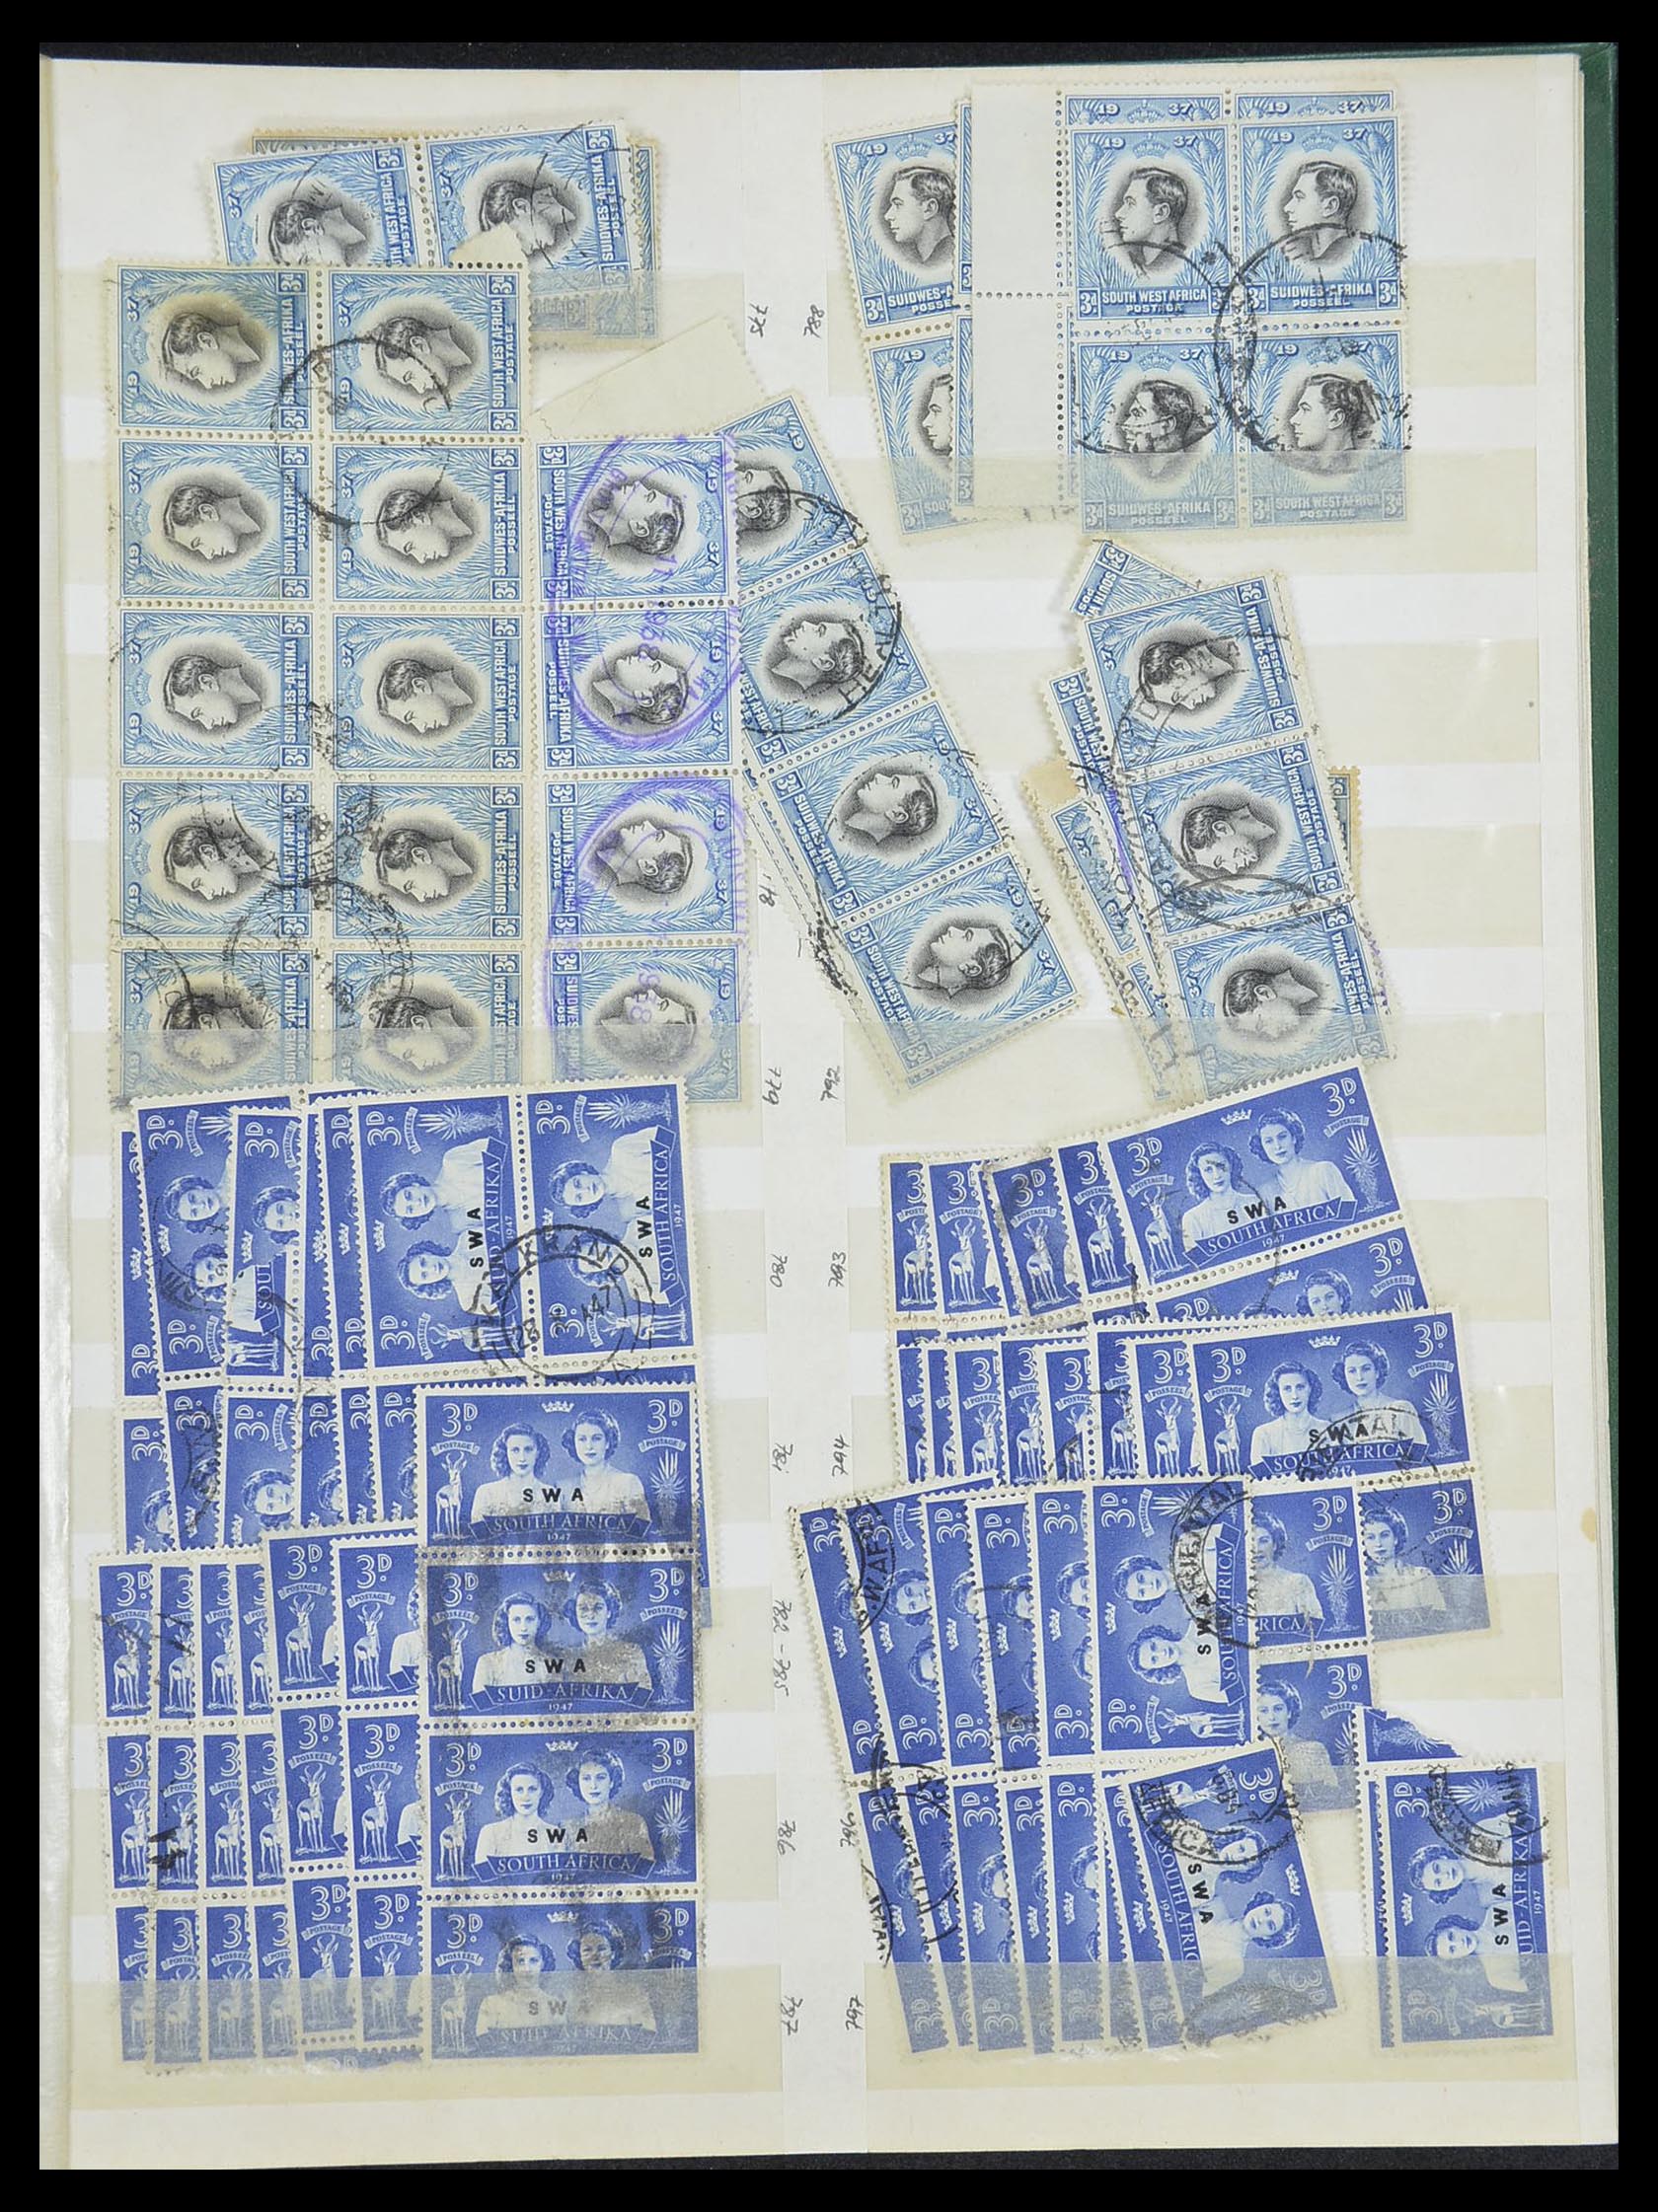 33431 019 - Stamp collection 33431 South West Africa 1930-1960.